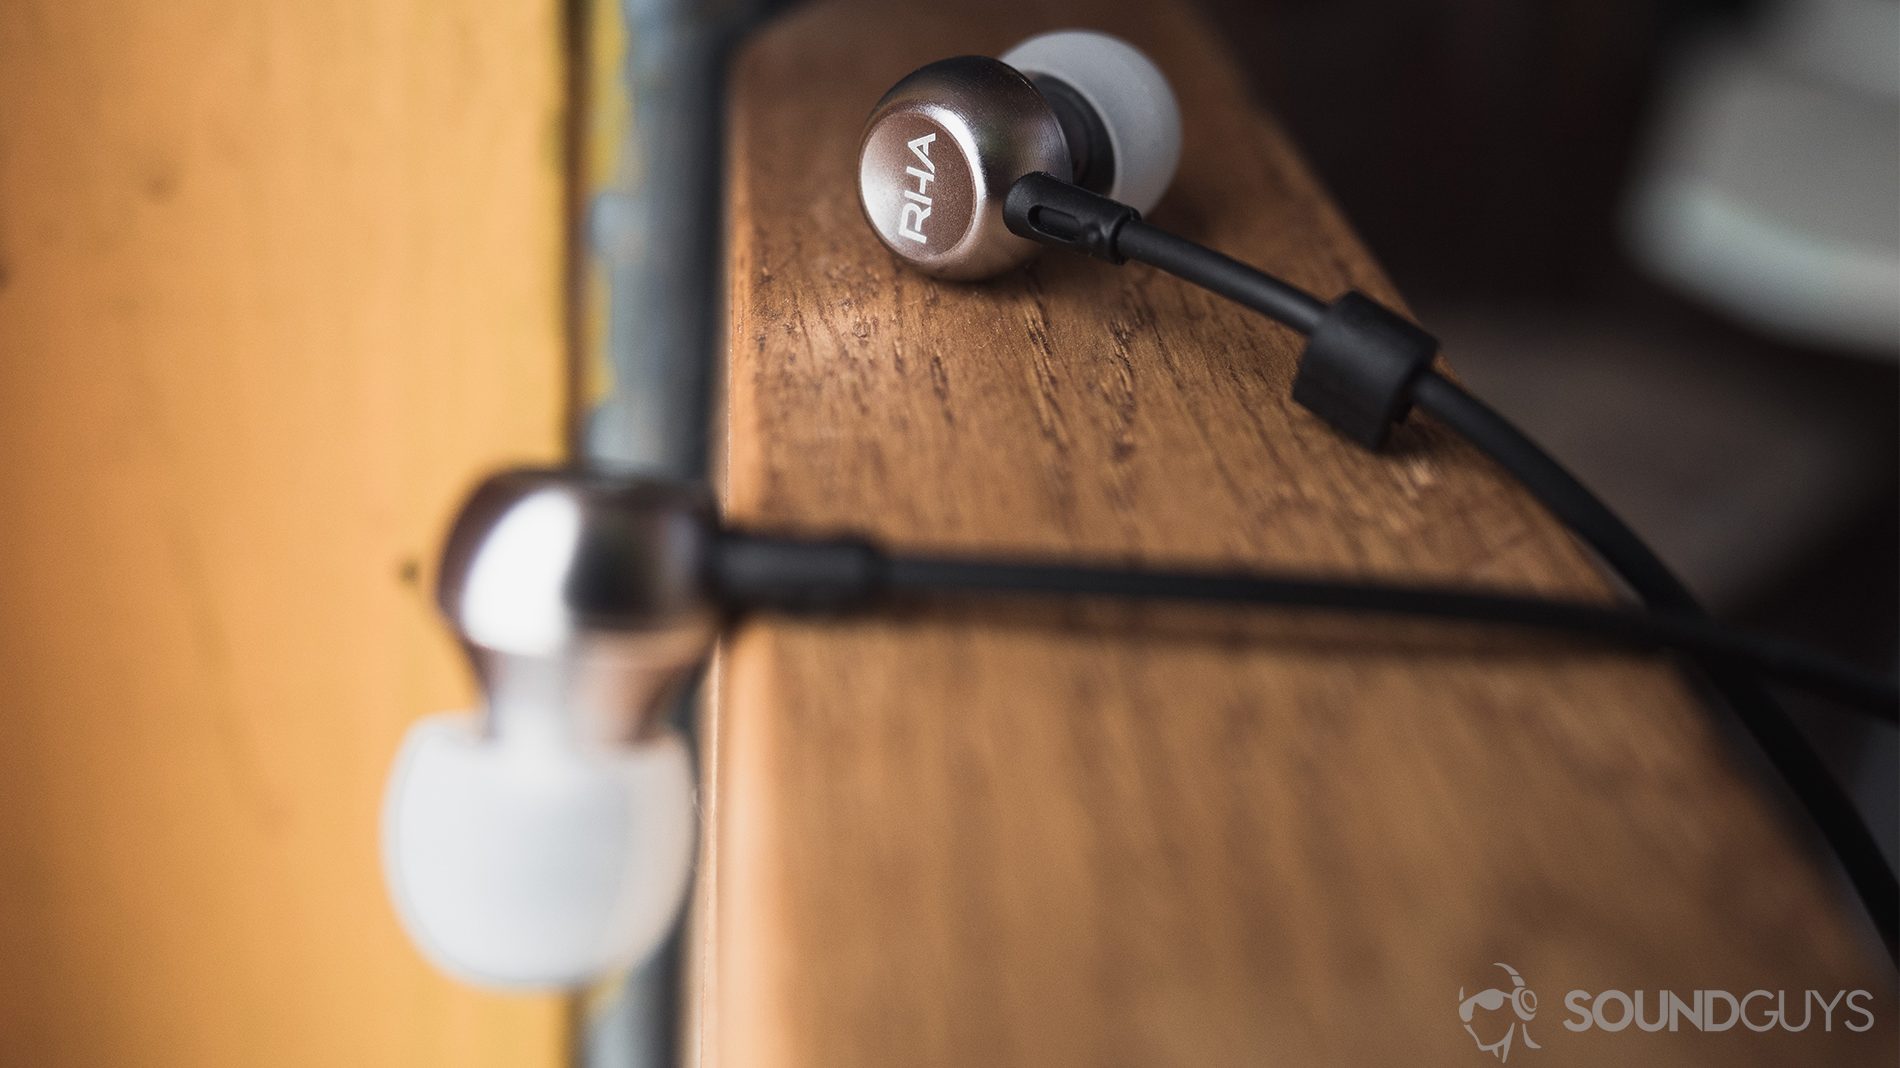 RHA MA390 review: The earbuds on a wooden railing.